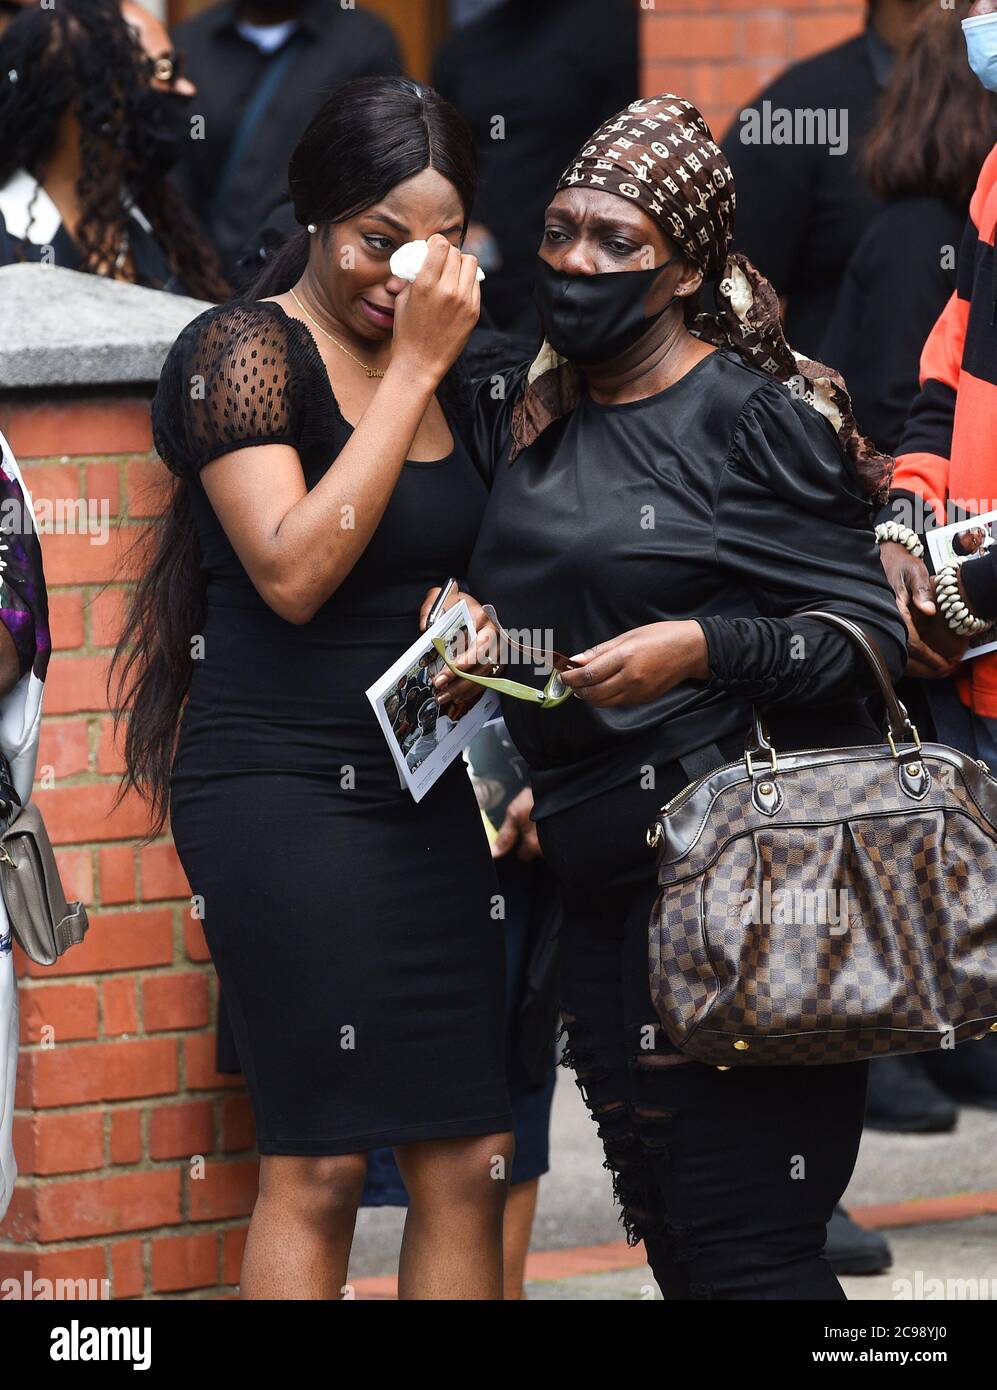 RETRANSMITTING CORRECTING NAME OF SISTER FROM KHAJI TO KHAFI CORRECT CAPTION BELOW Khafi Kareem (left), the sister of Alexander Kareem, after his funeral service at the Church of Holy Ghost and St Stephens in London. Stock Photo